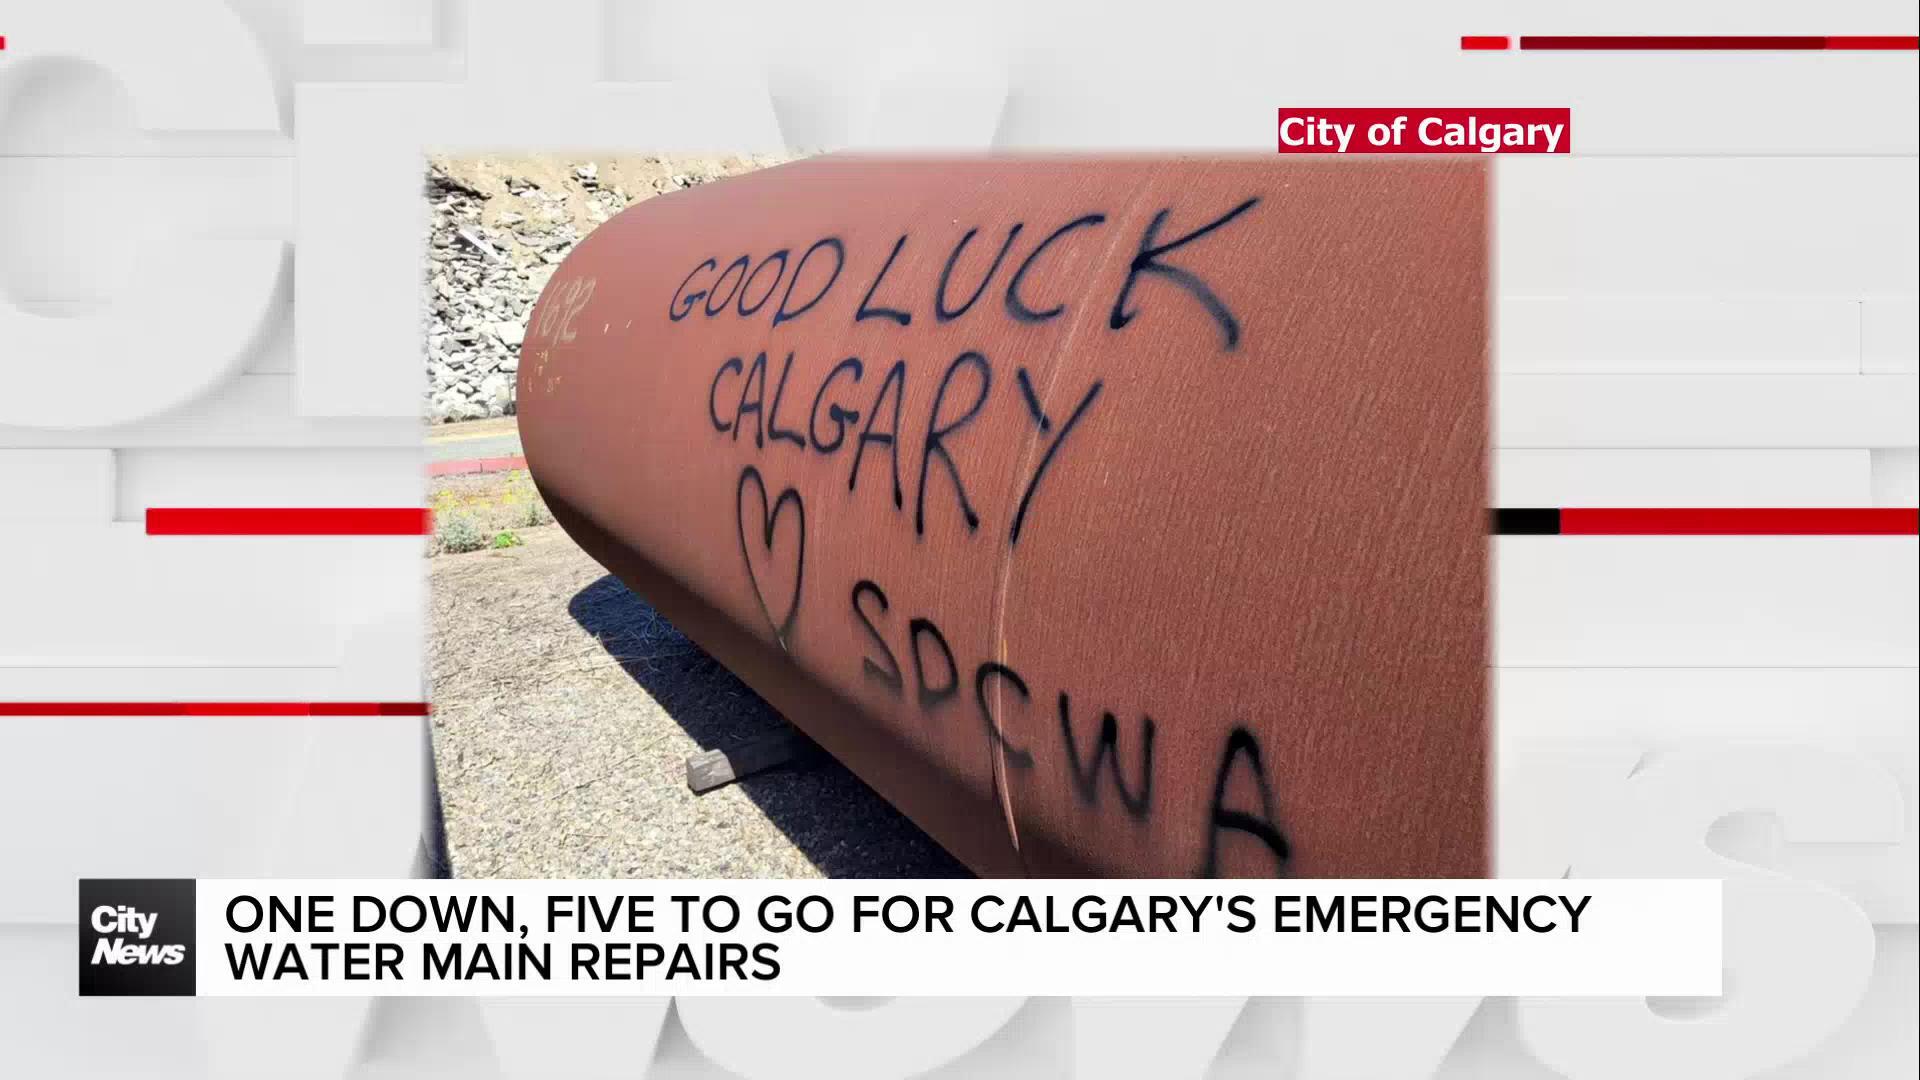 One down, five to go for Calgary's emergency water main repairs